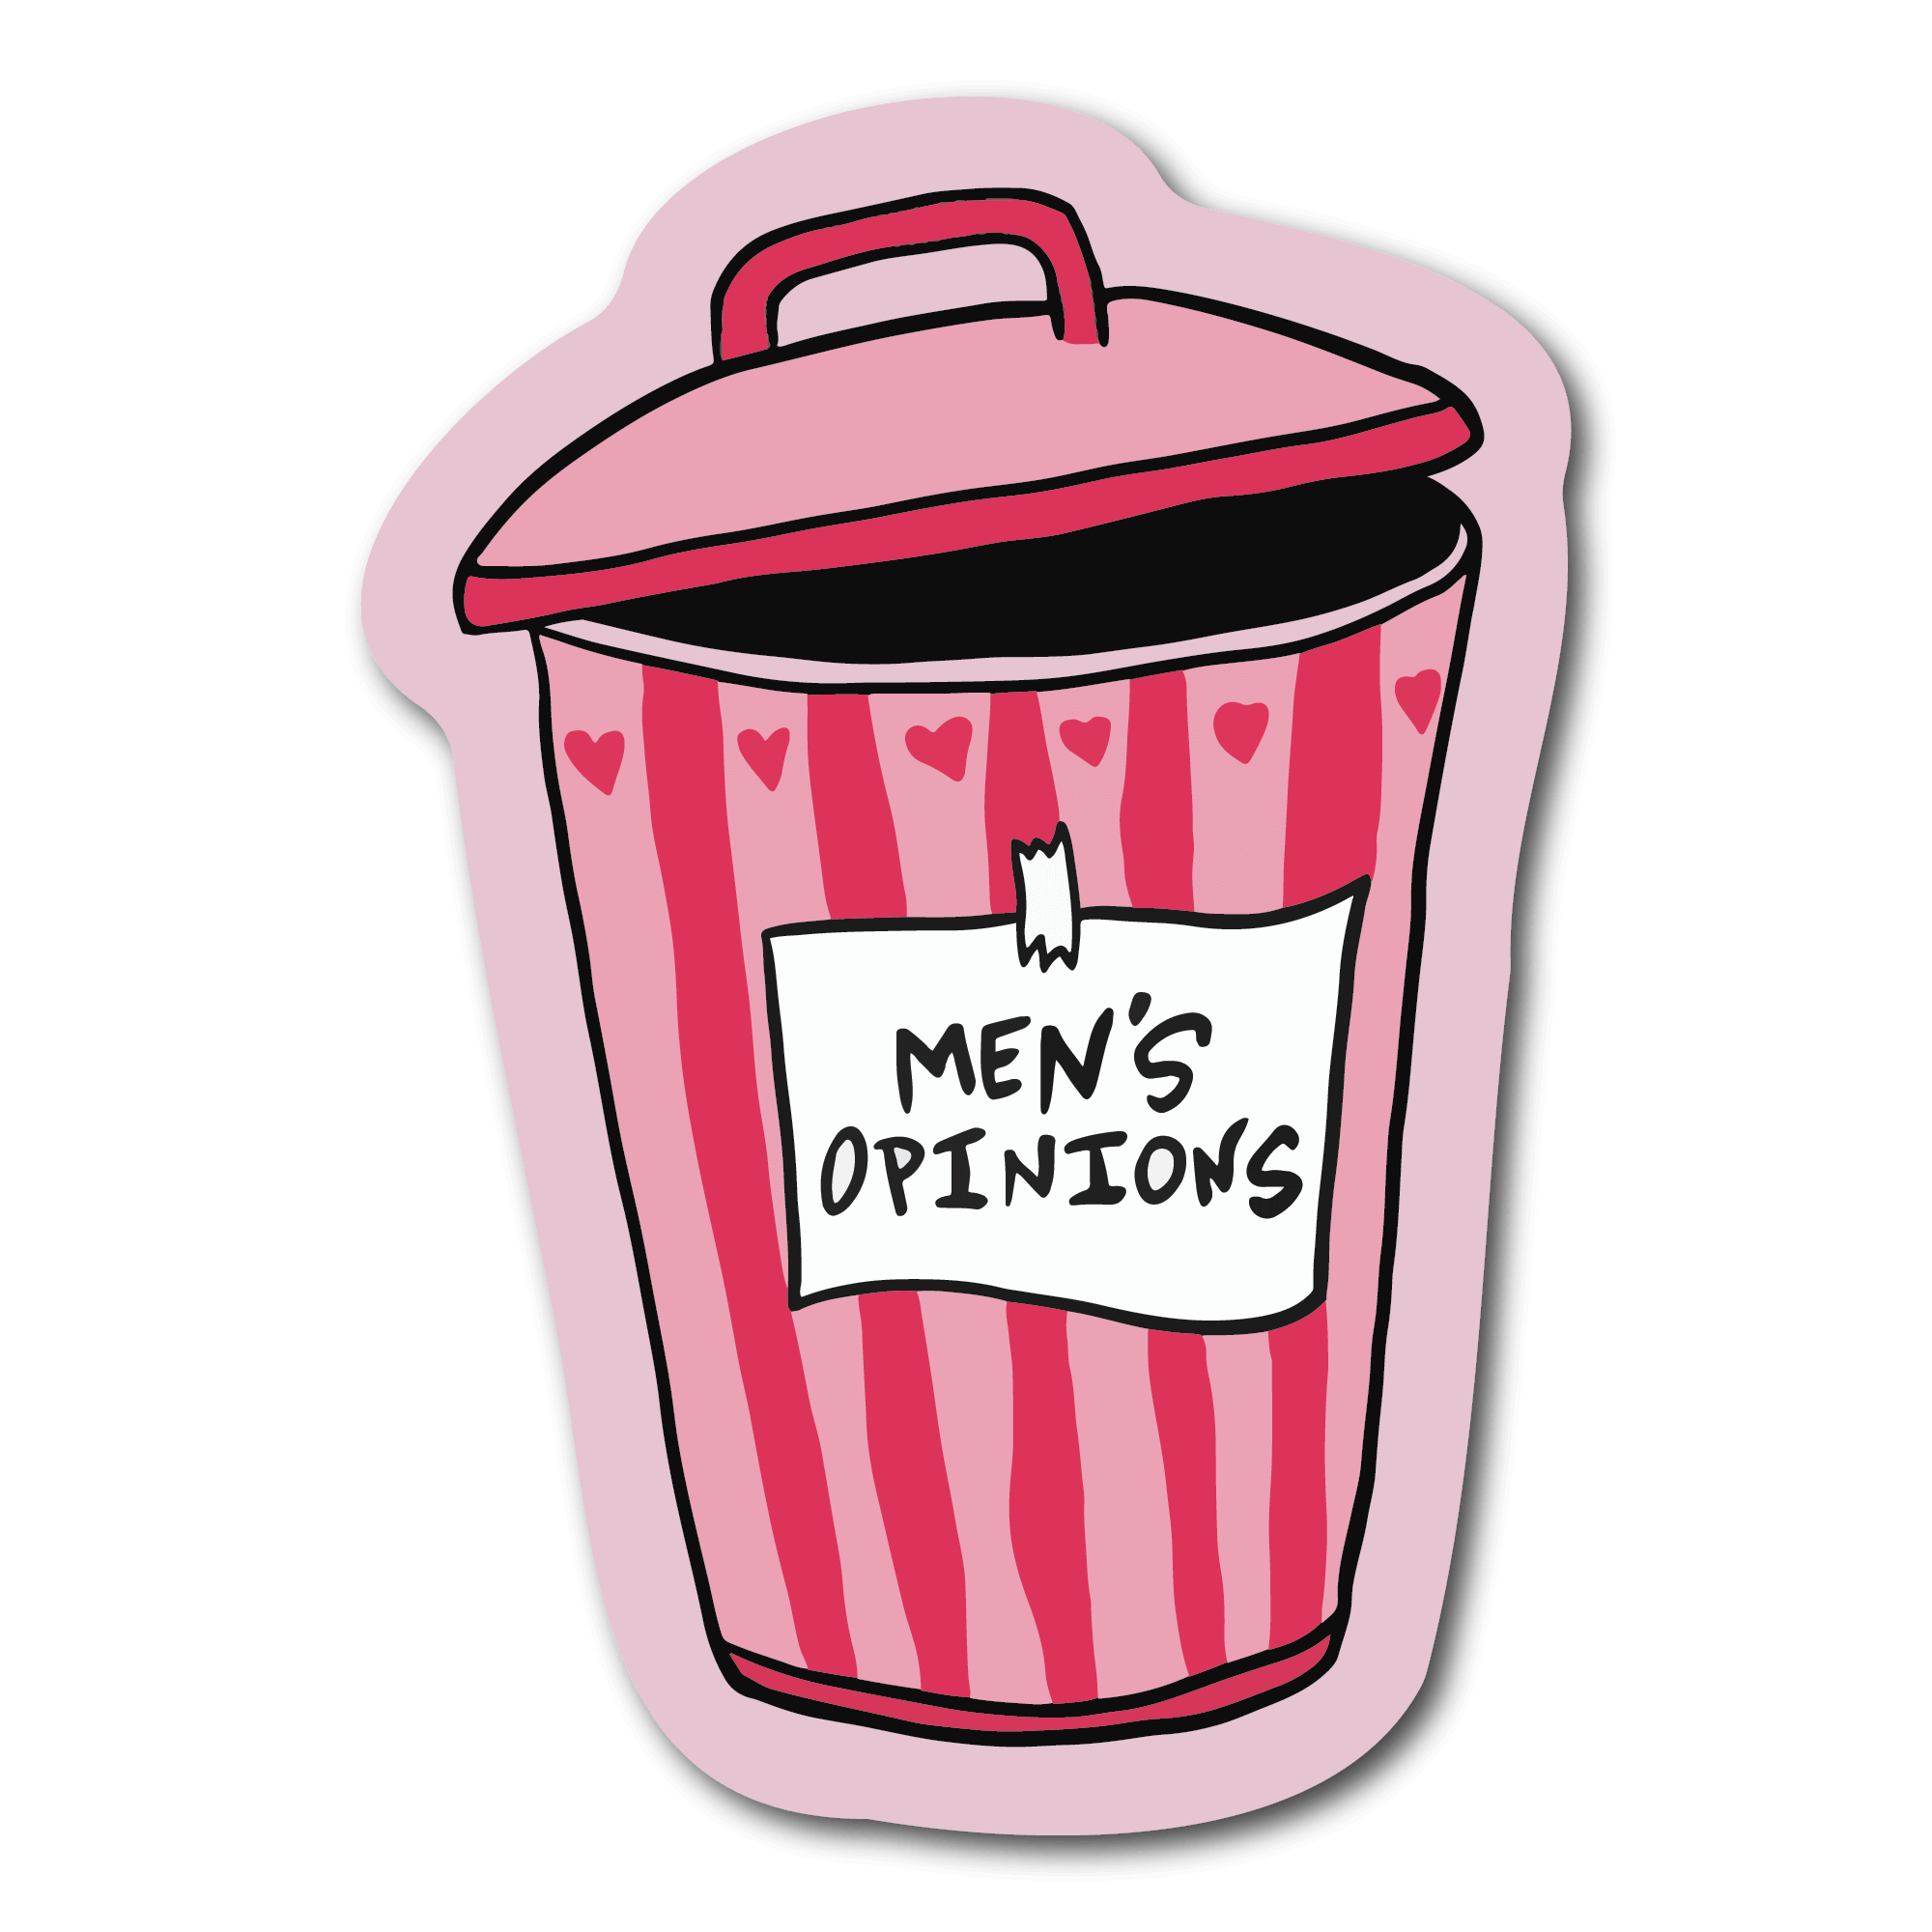 Small Sticker of a pink trash can with a sign taped to it that says Men's Opinions